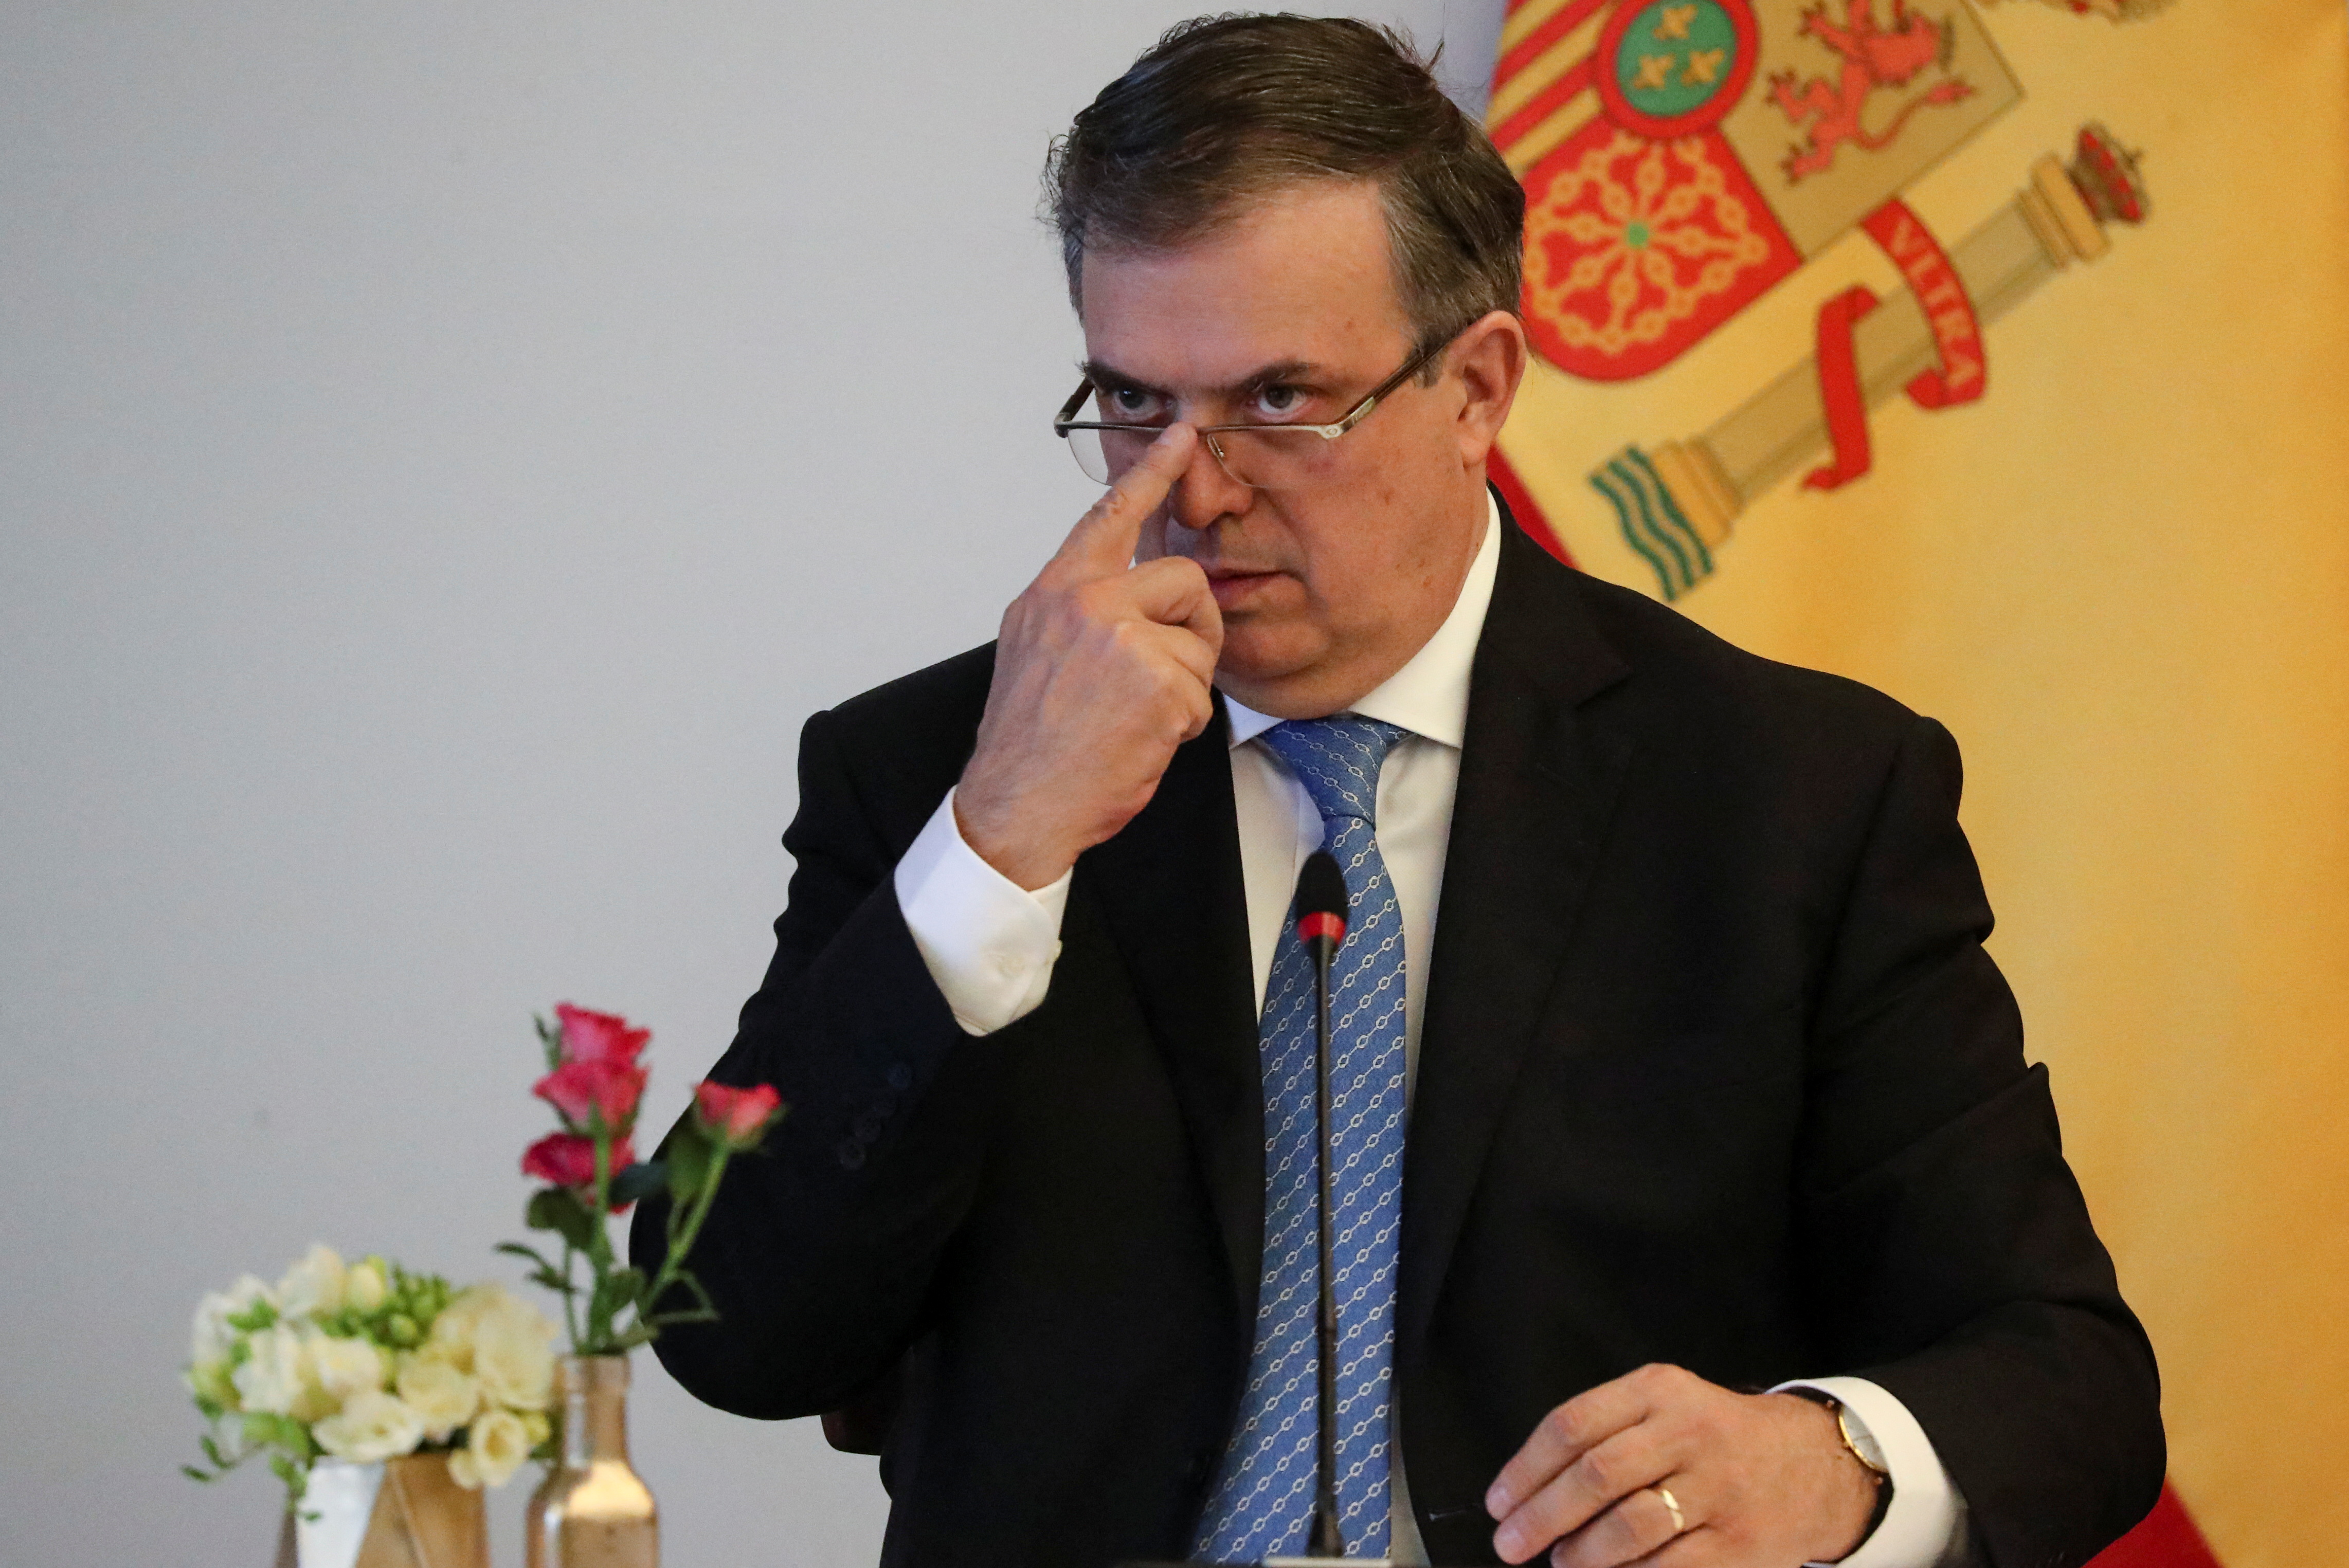 Spain's Foreign Minister Jose Manuel Albares visits Mexico